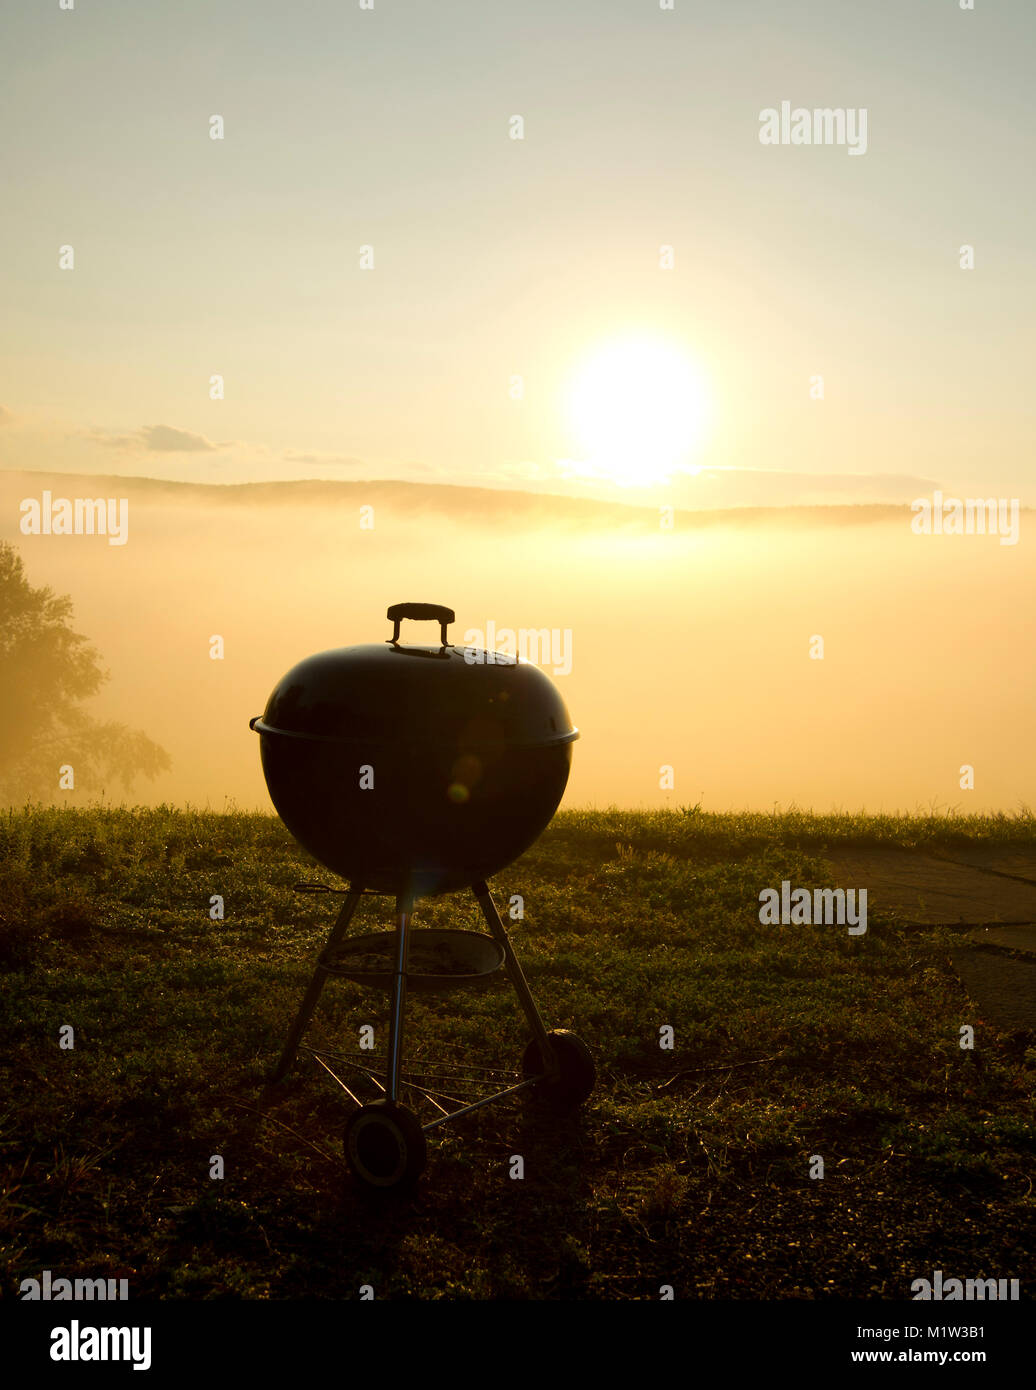 BBQ Grill at Misty Sunrise Stock Photo